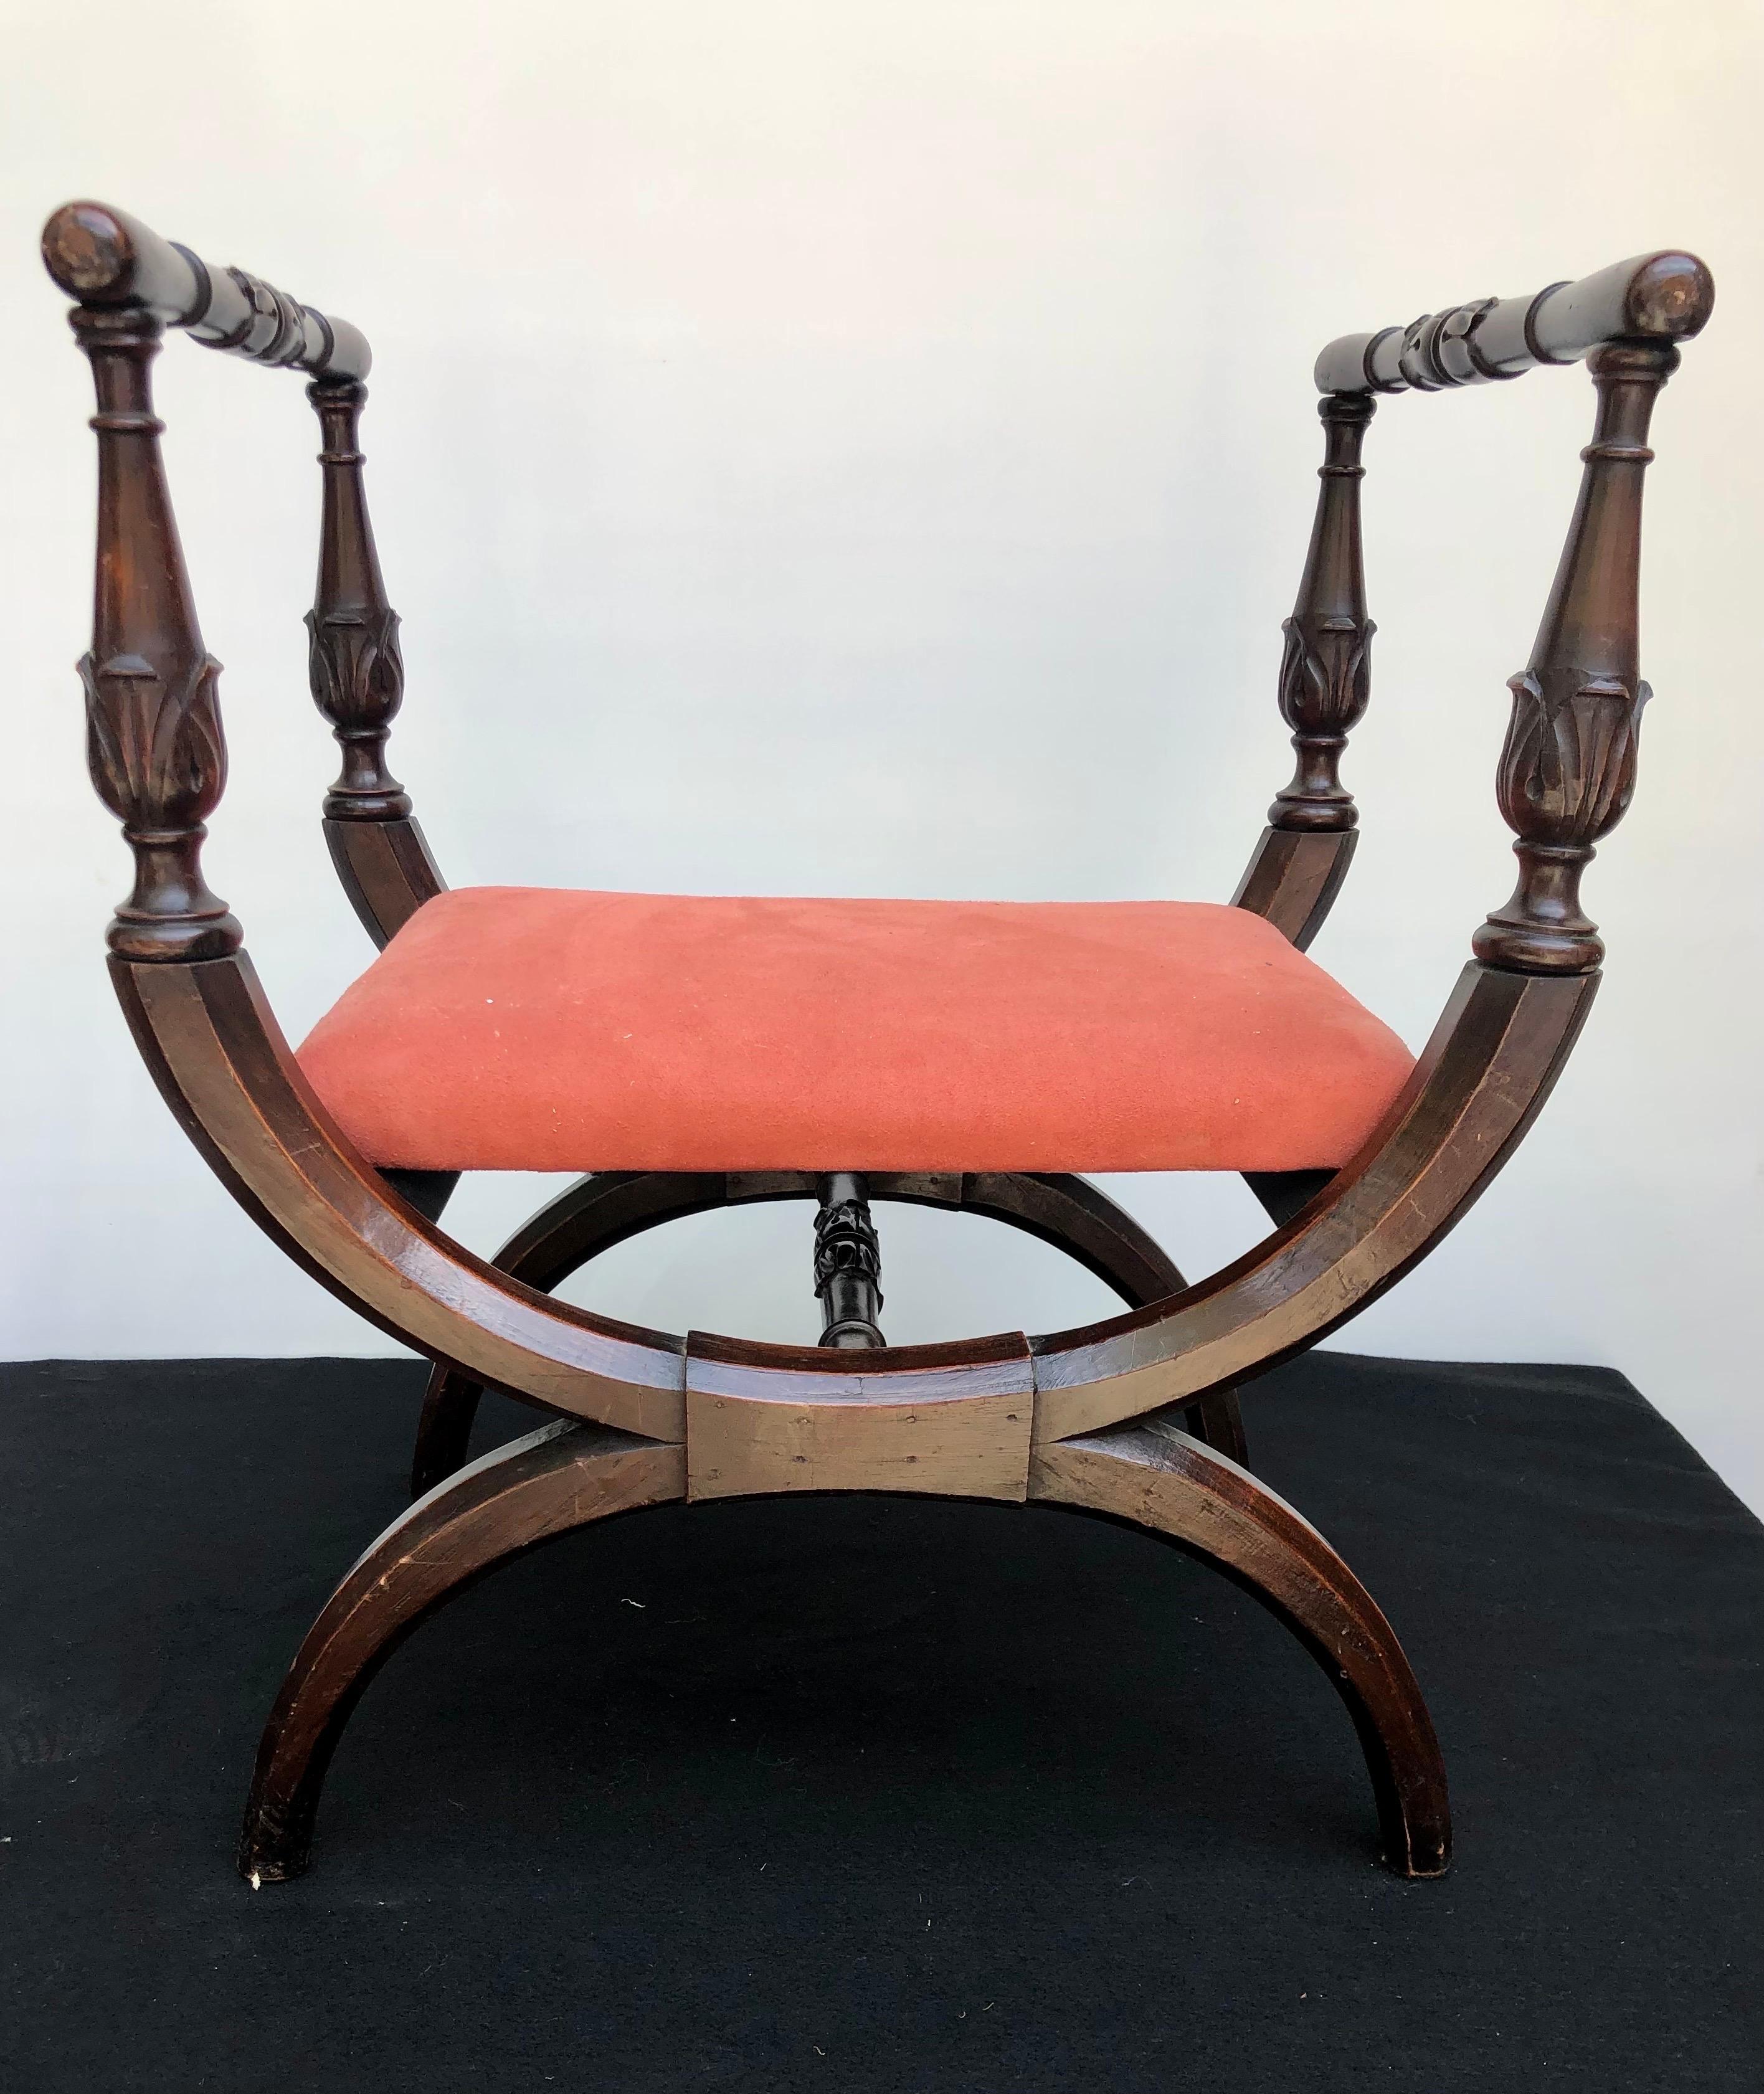 Elegant Neoclassical Italian bench, circa 1815, with a curulean frame and coral suede upholstery was made in the early 19th Century. A related example can be found on page 315 in 